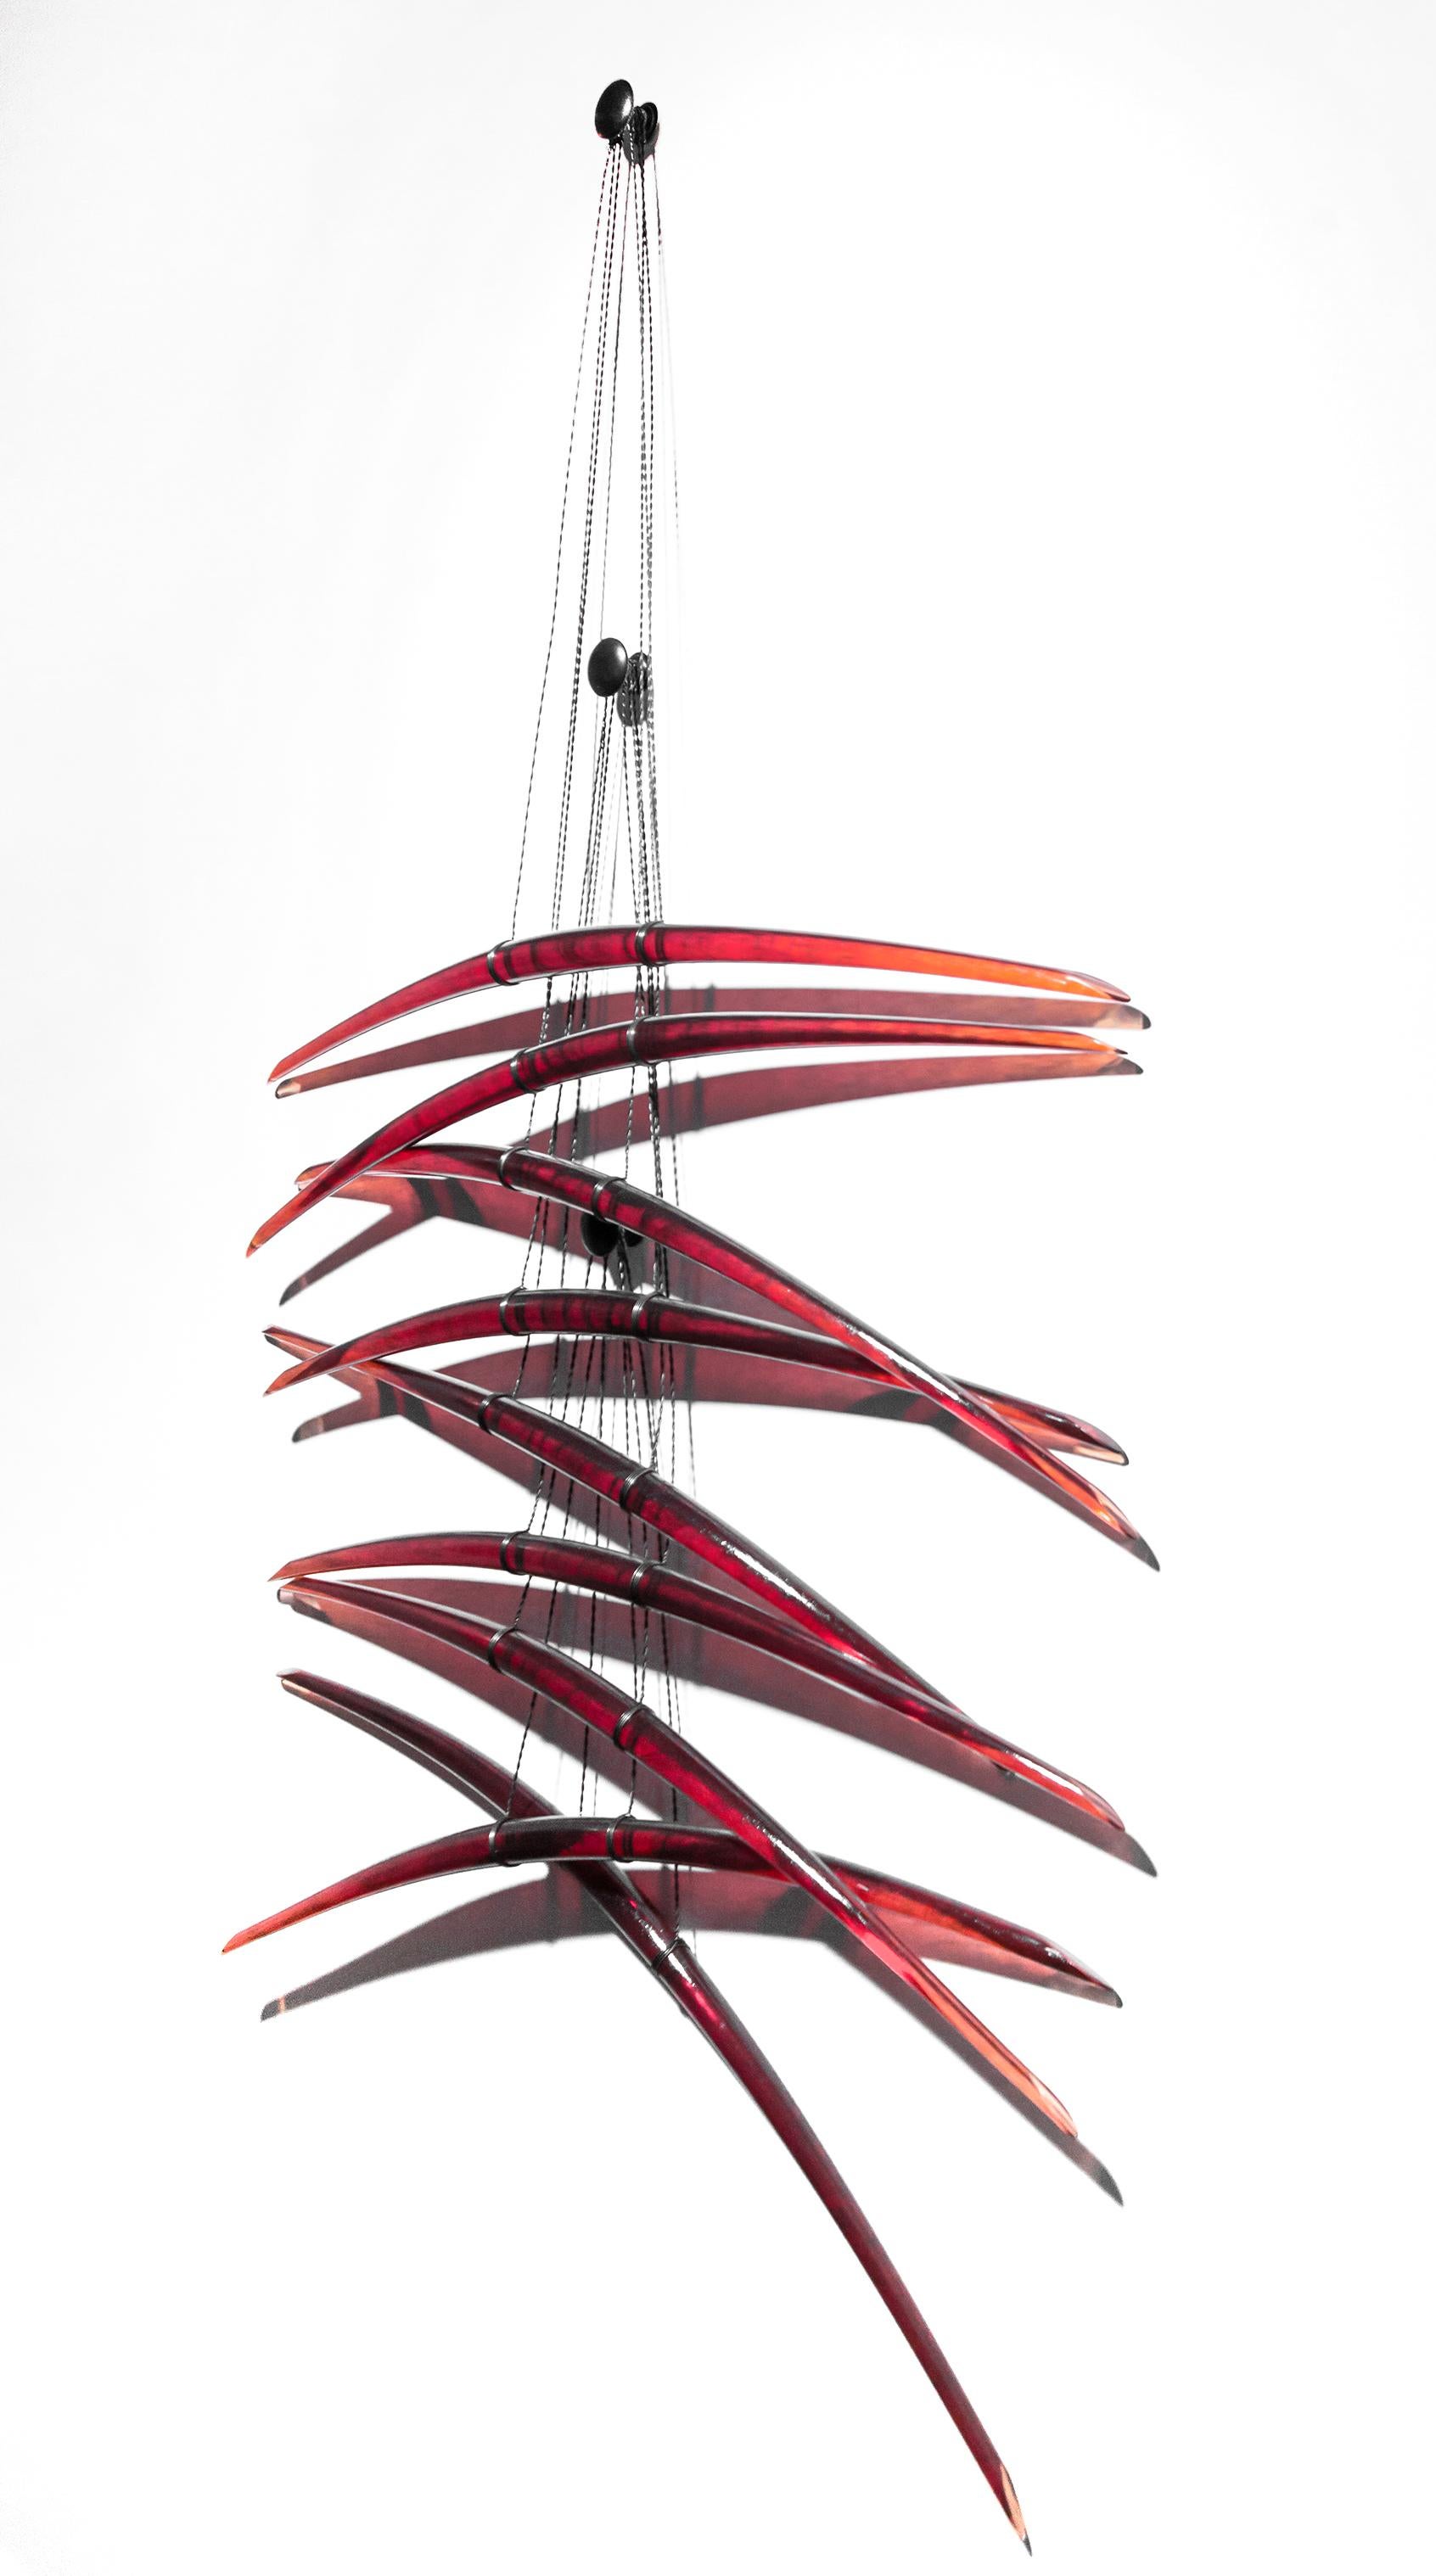 Duality R - dynamic, translucent, red, glass, steel, abstract wall sculpture - Sculpture by John Paul Robinson